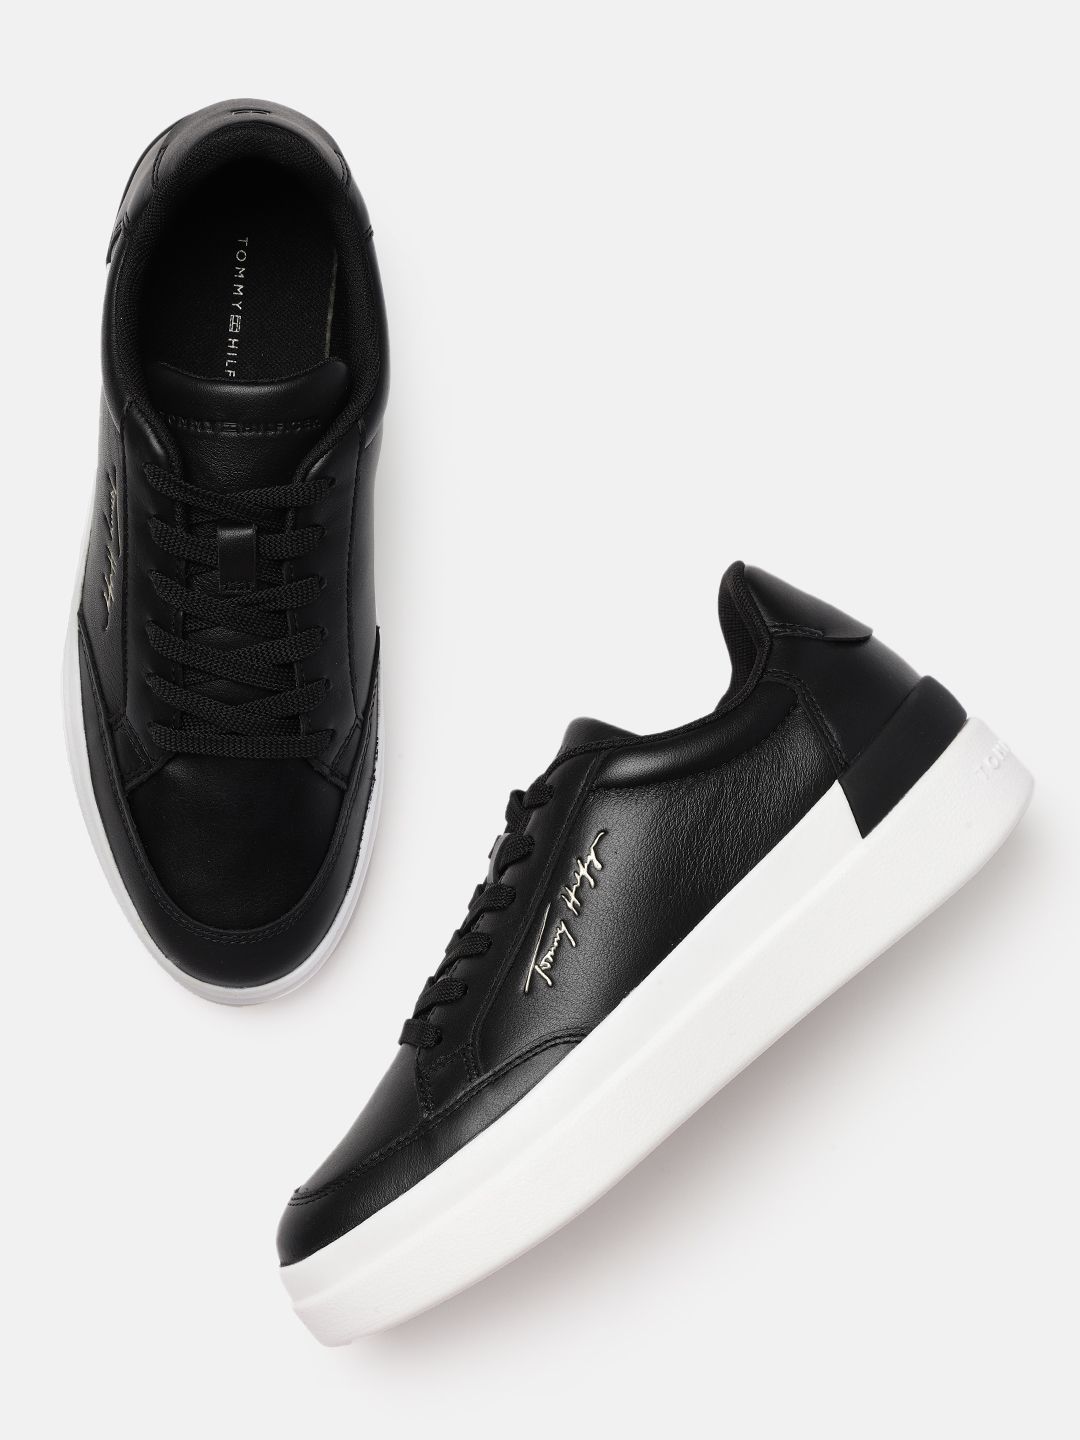 Tommy Hilfiger Women Black Solid Leather Regular Sneakers with Brand Logo Embossed Detail Price in India